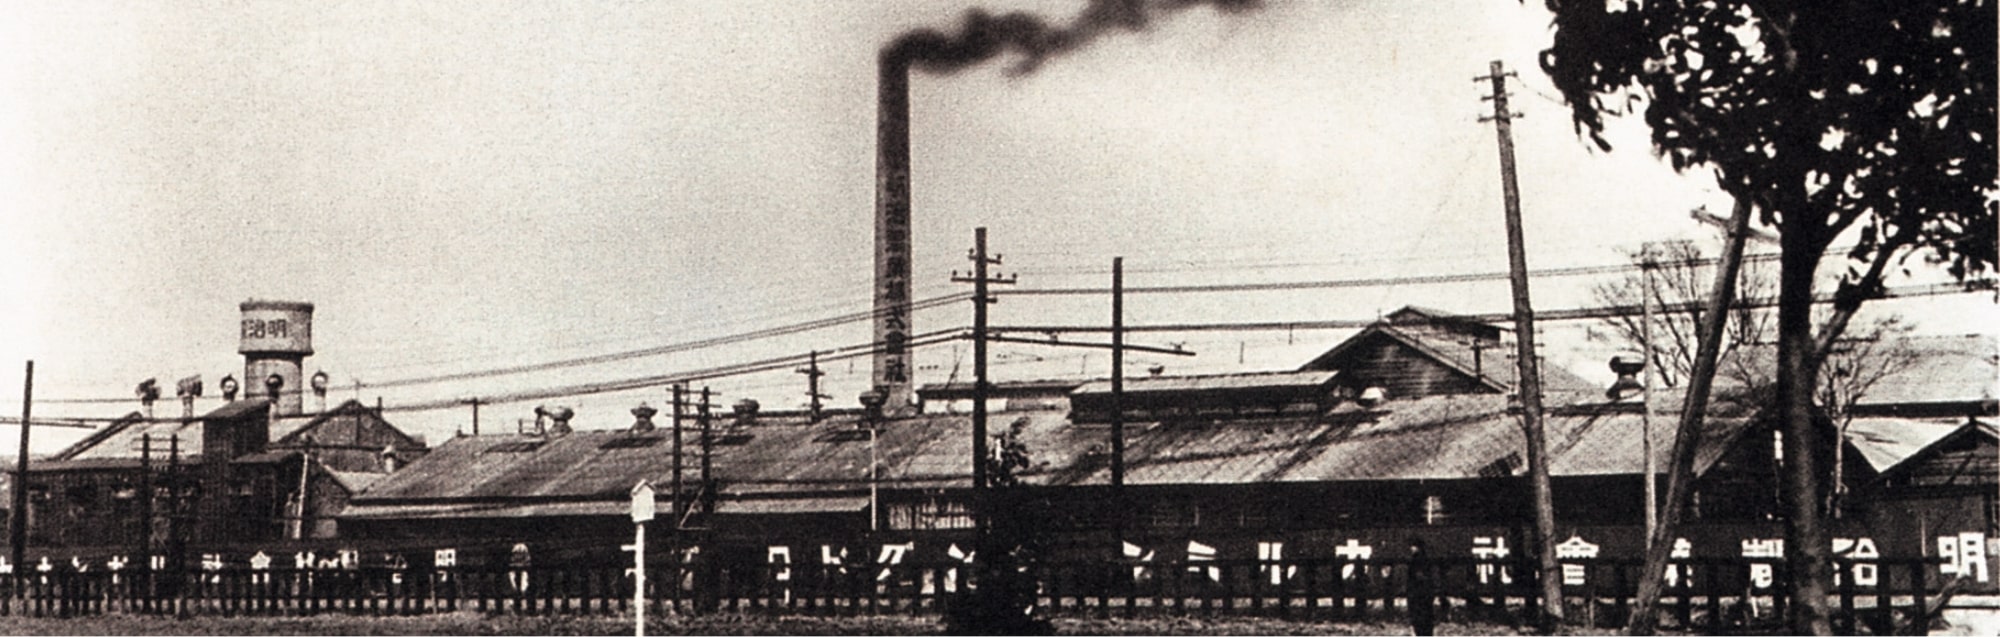 =Photo of an old confectionery plant